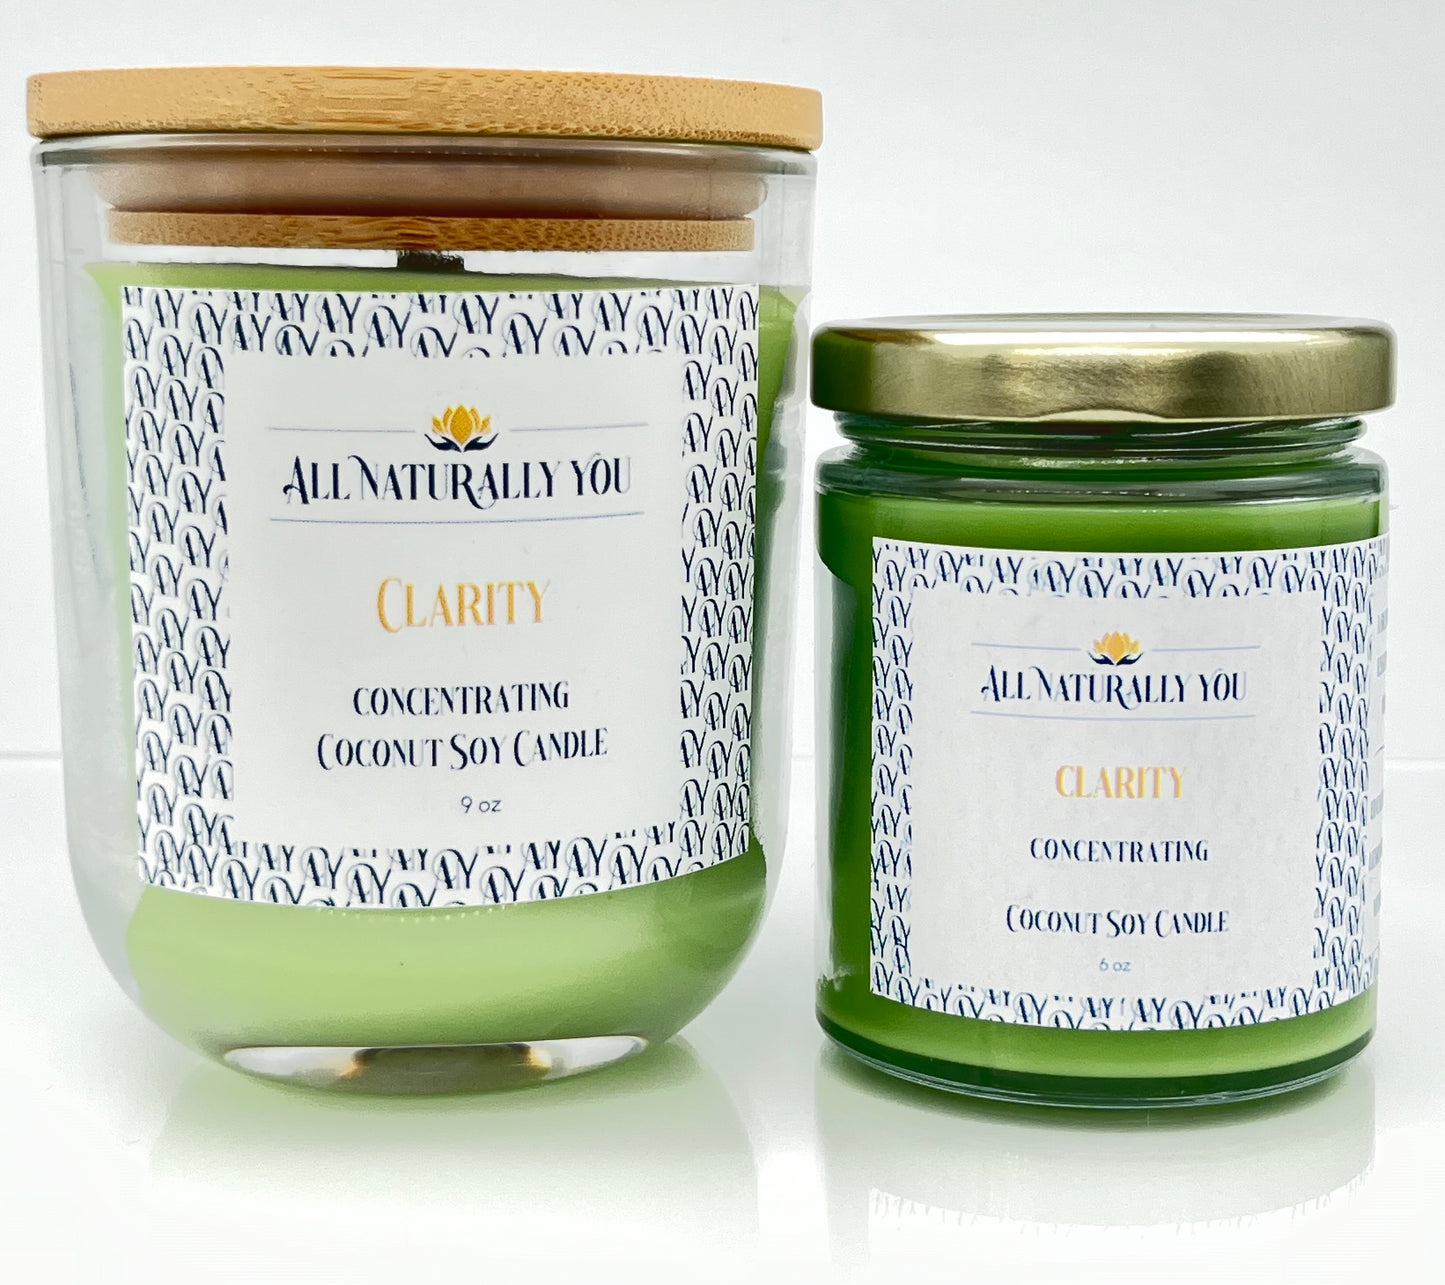 Clarity Aromatherapy Coconut Soy Candle